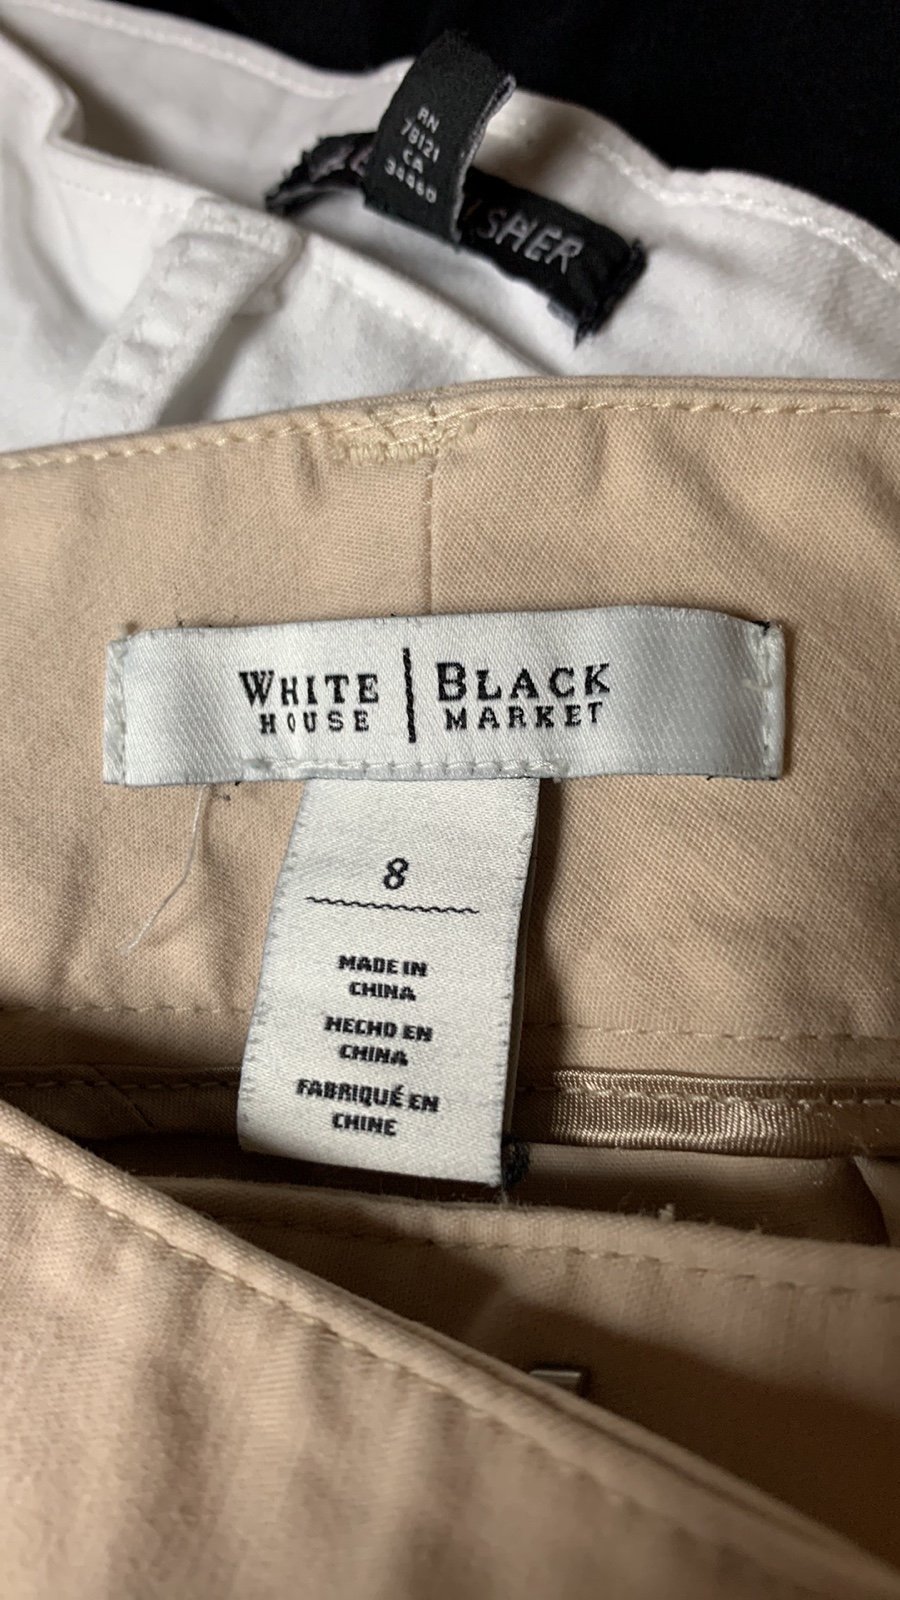 cheapest place to buy  White House Black Market cropped pants light khaki color  Size 8 MbsC9UvGe online store